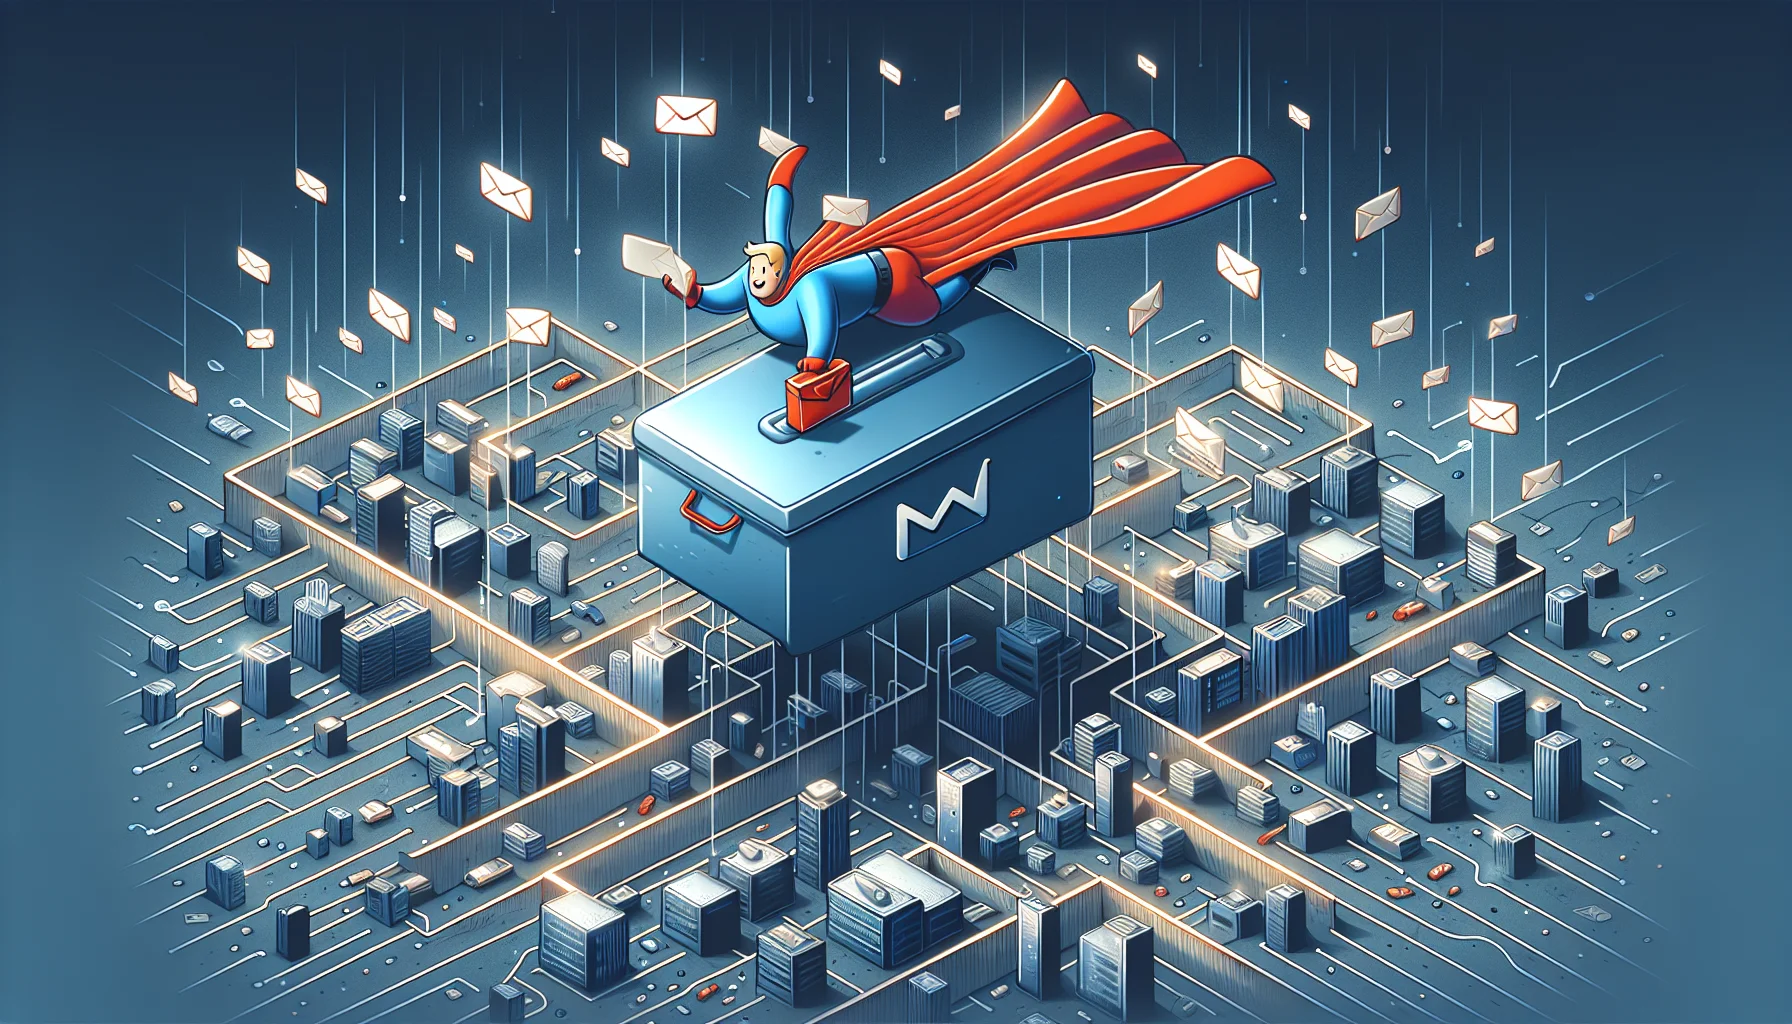 Create a whimsical scene depicting the concept of email backup from a web hosting company, symbolized by a super-hero character in a cape with the emblem of a mail envelope on their chest. In the scenario, this character is seen flying over a city that is depicted as a complex network of computers, representing servers. The superhero is swooping in, carrying a large safety deposit box, a metaphor for secure backup, full of emails to distribute across the city network. The image should express the safety and reliability of the service in a fun, engaging way.